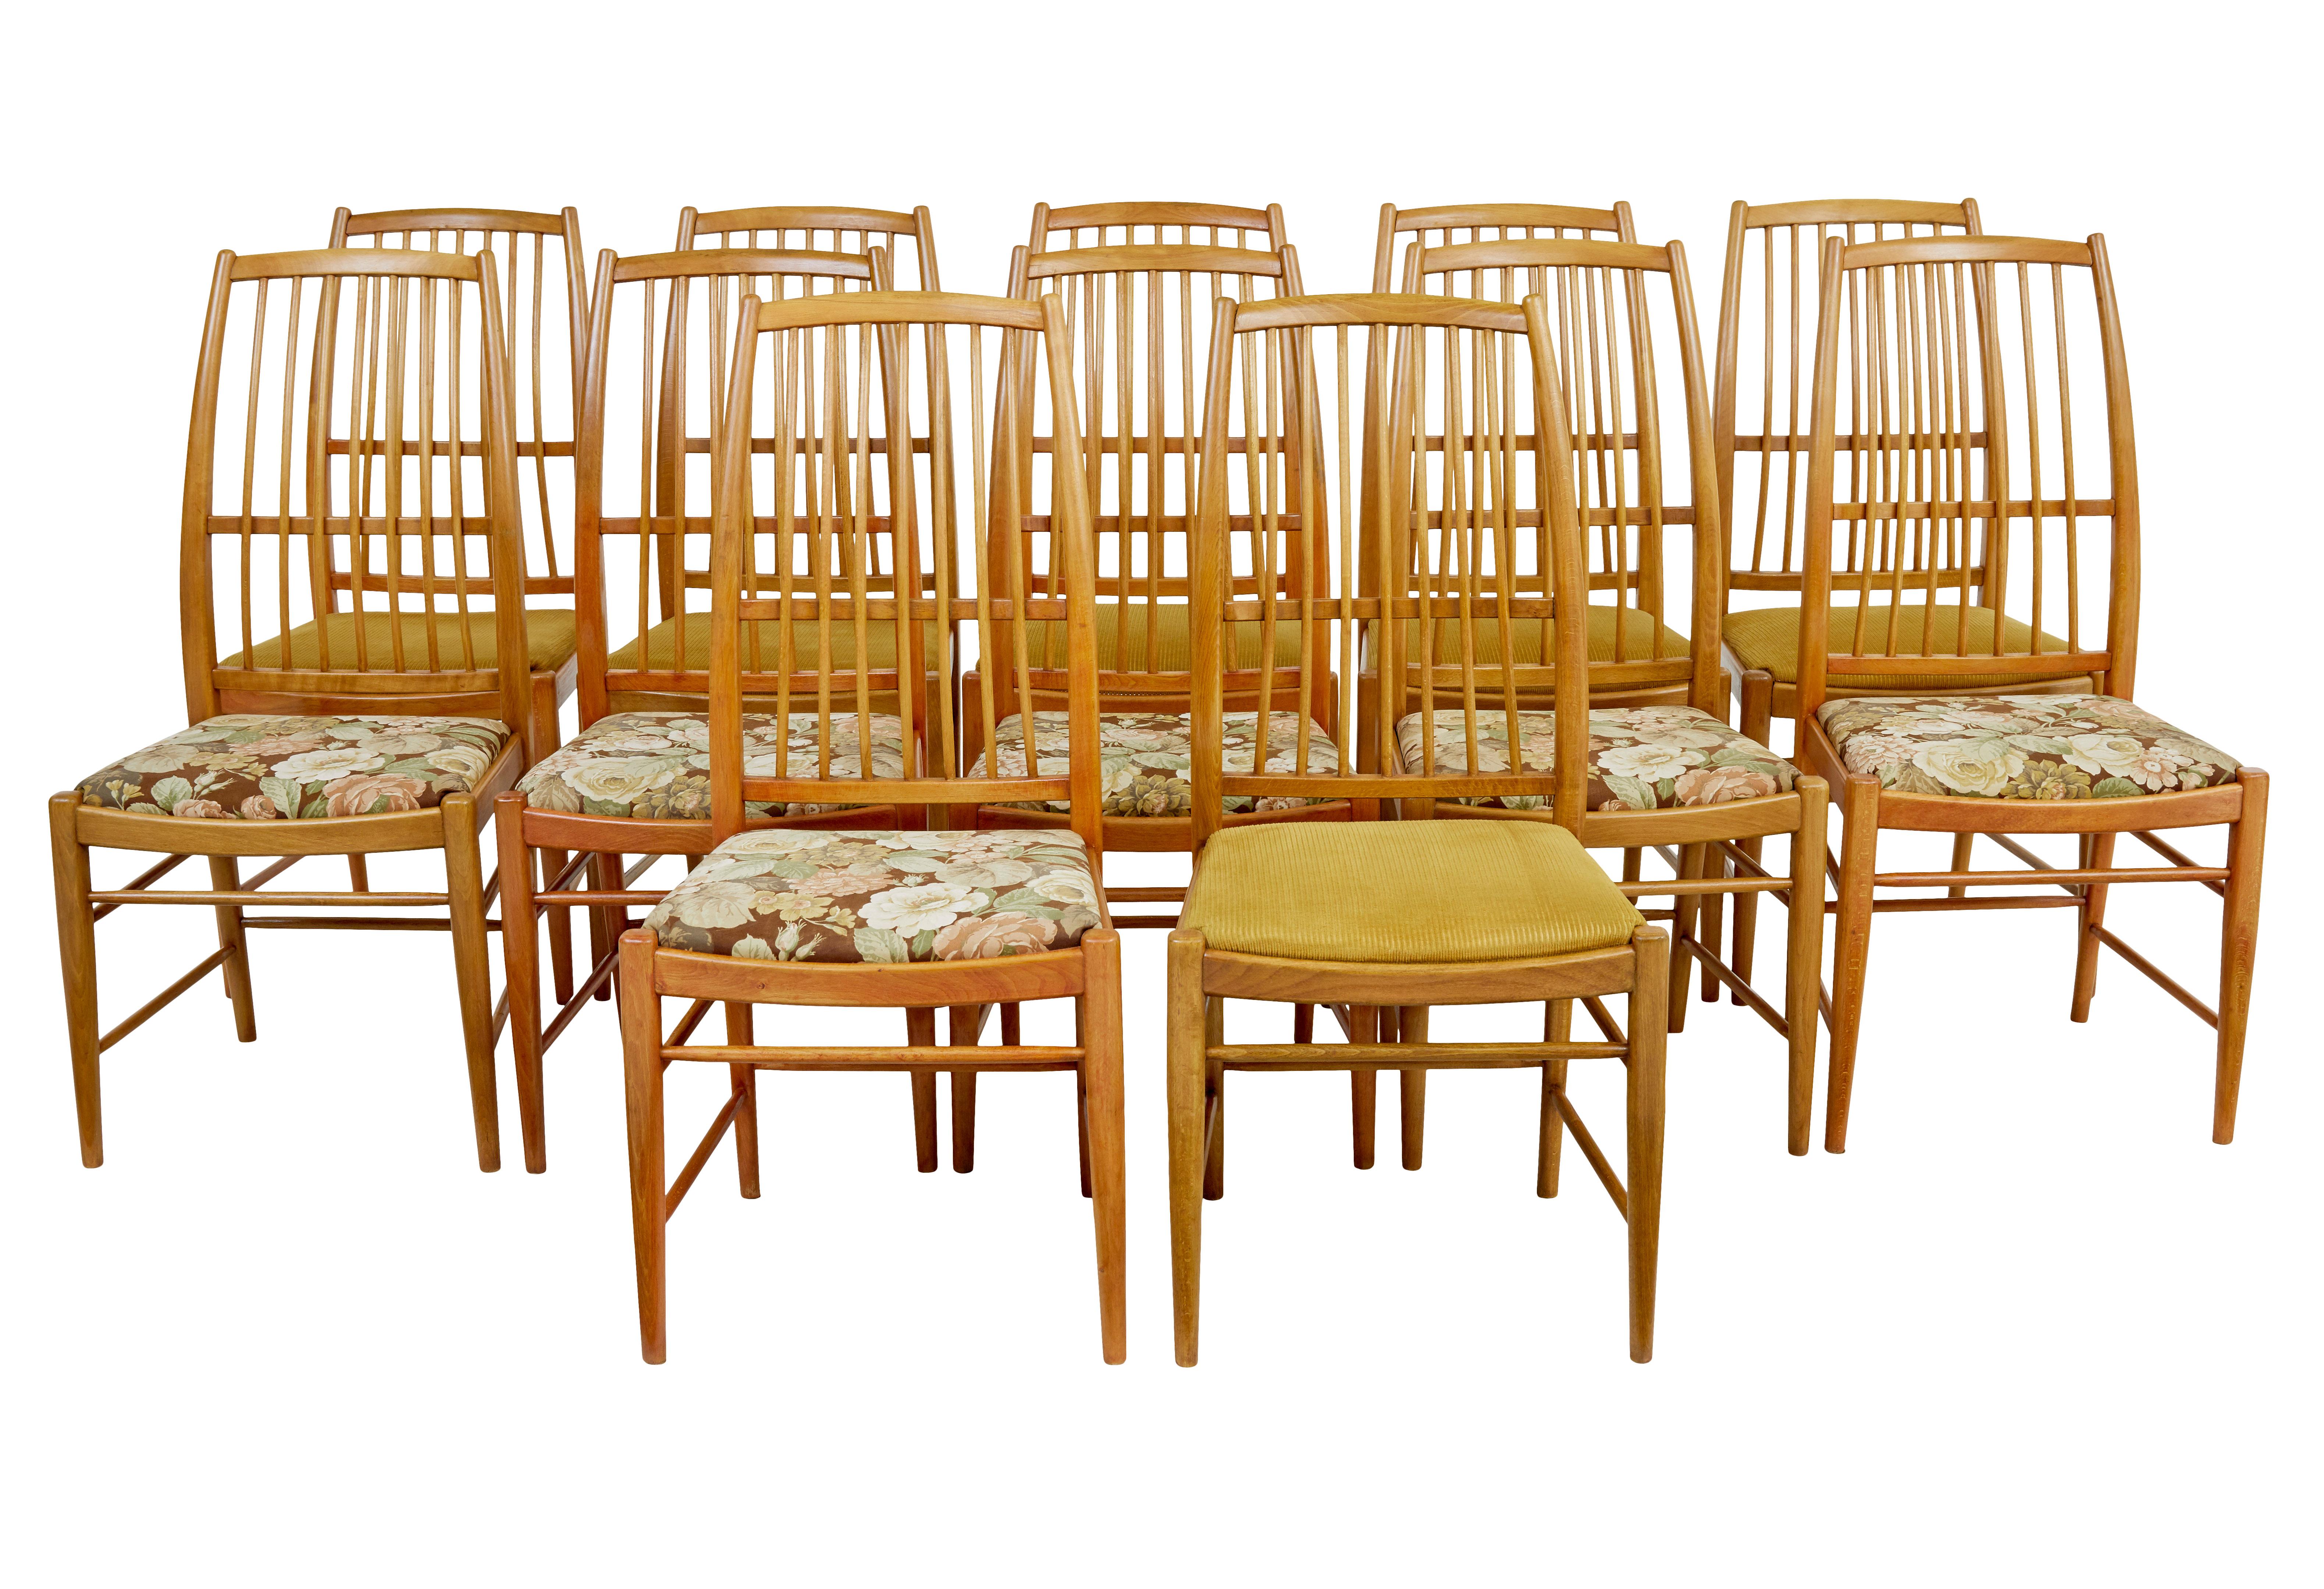 Fine set of 12 dining chairs designed by David Rosen in 1953.

Likely to comprise of 2 sets of 6 due to the different fabrics and slightly different wood tones.

Designed for Nordiska Kompaniet these high back dining chairs are known as the napoli